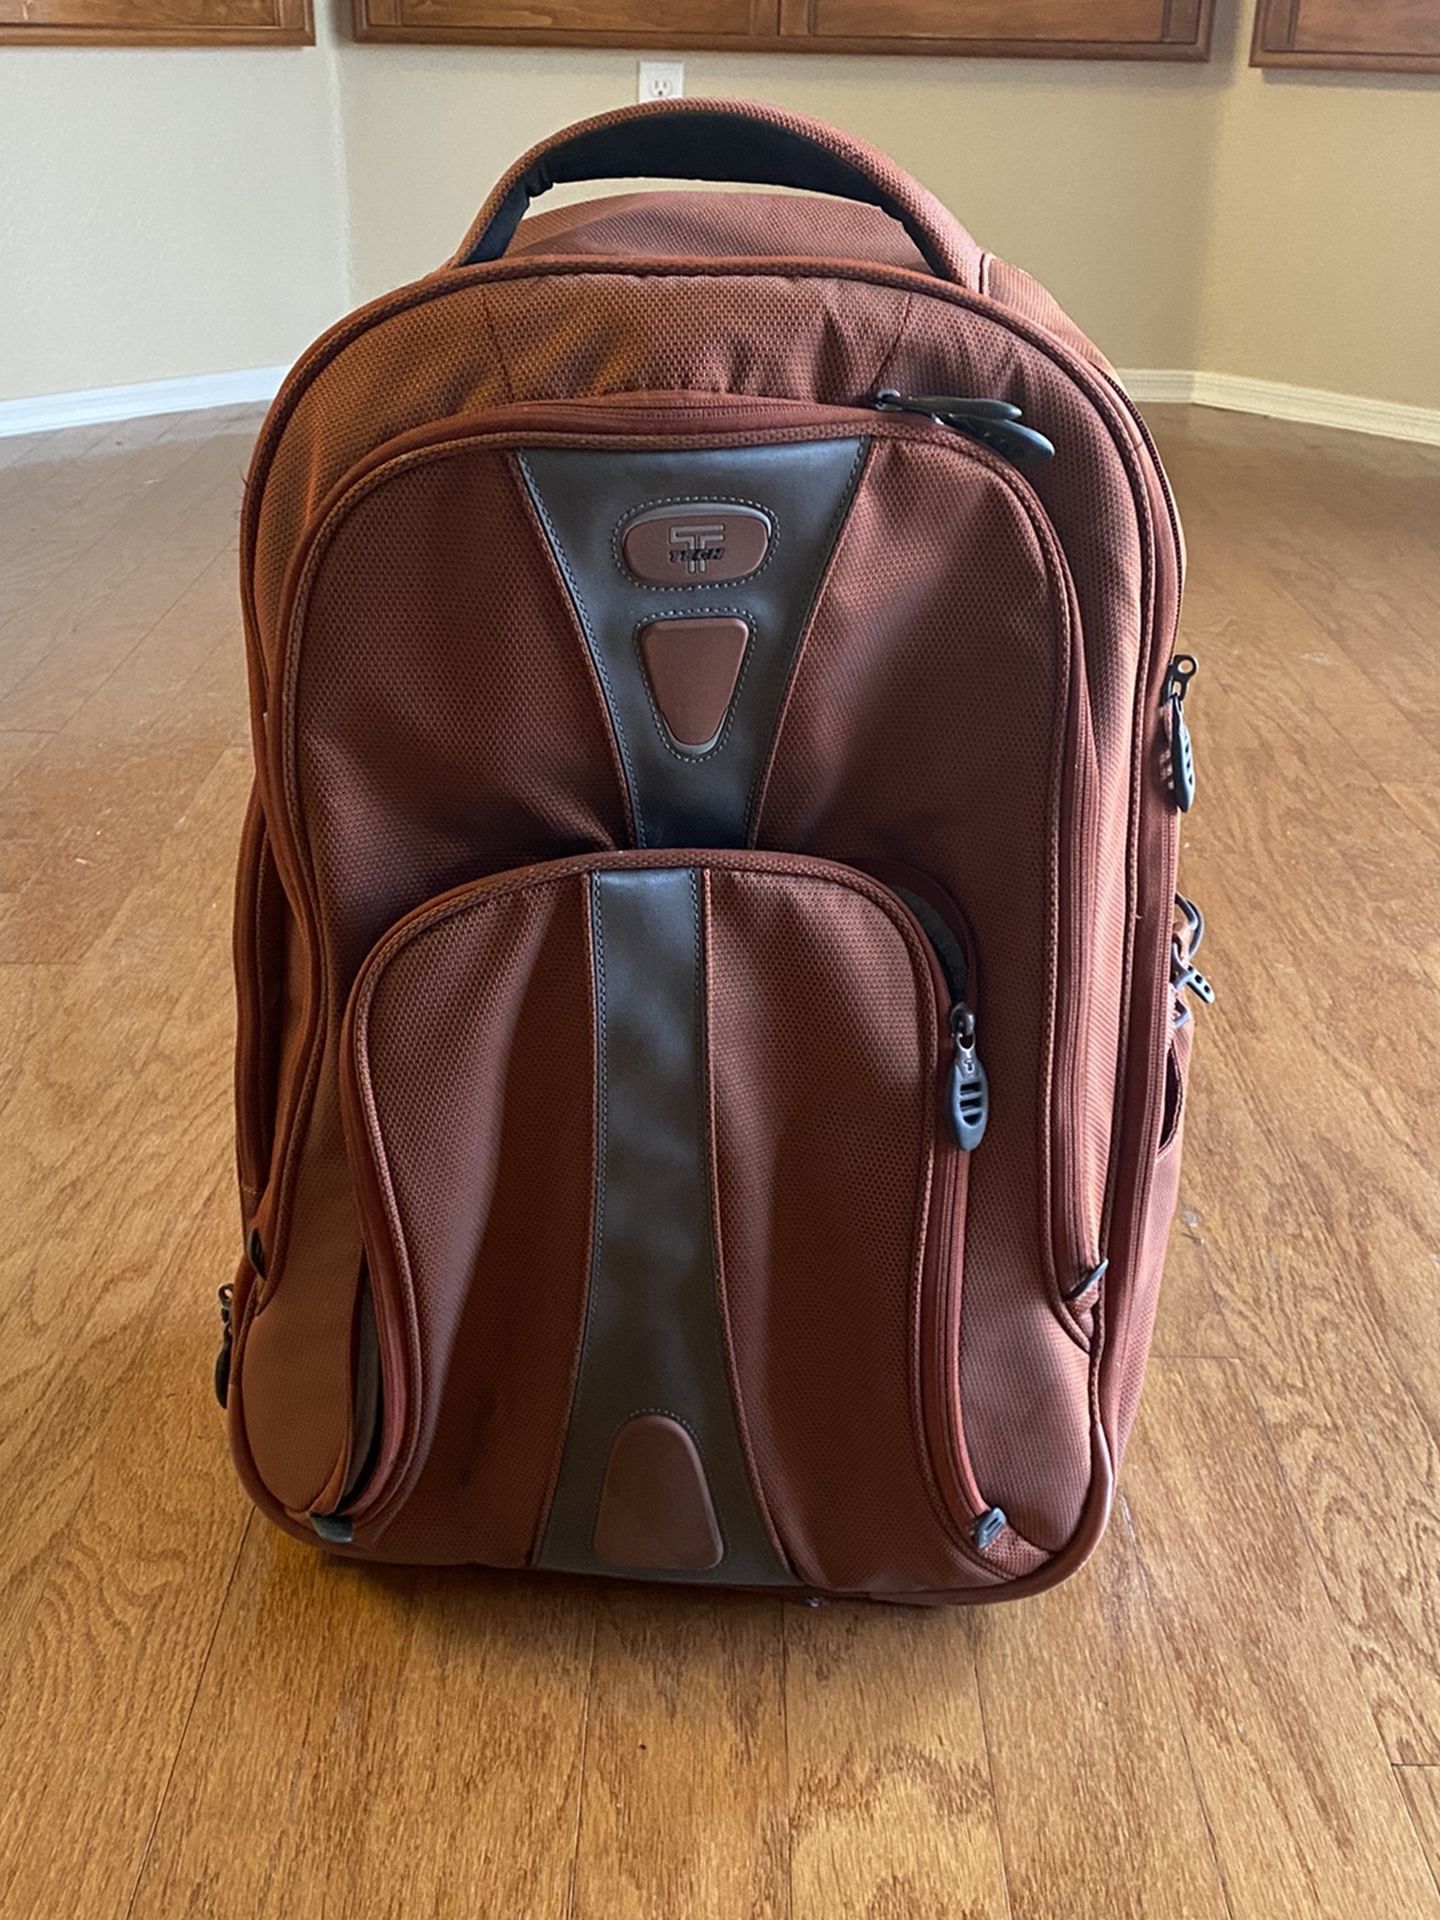 Authentic Tumi T-Tech Wheeled Backpack